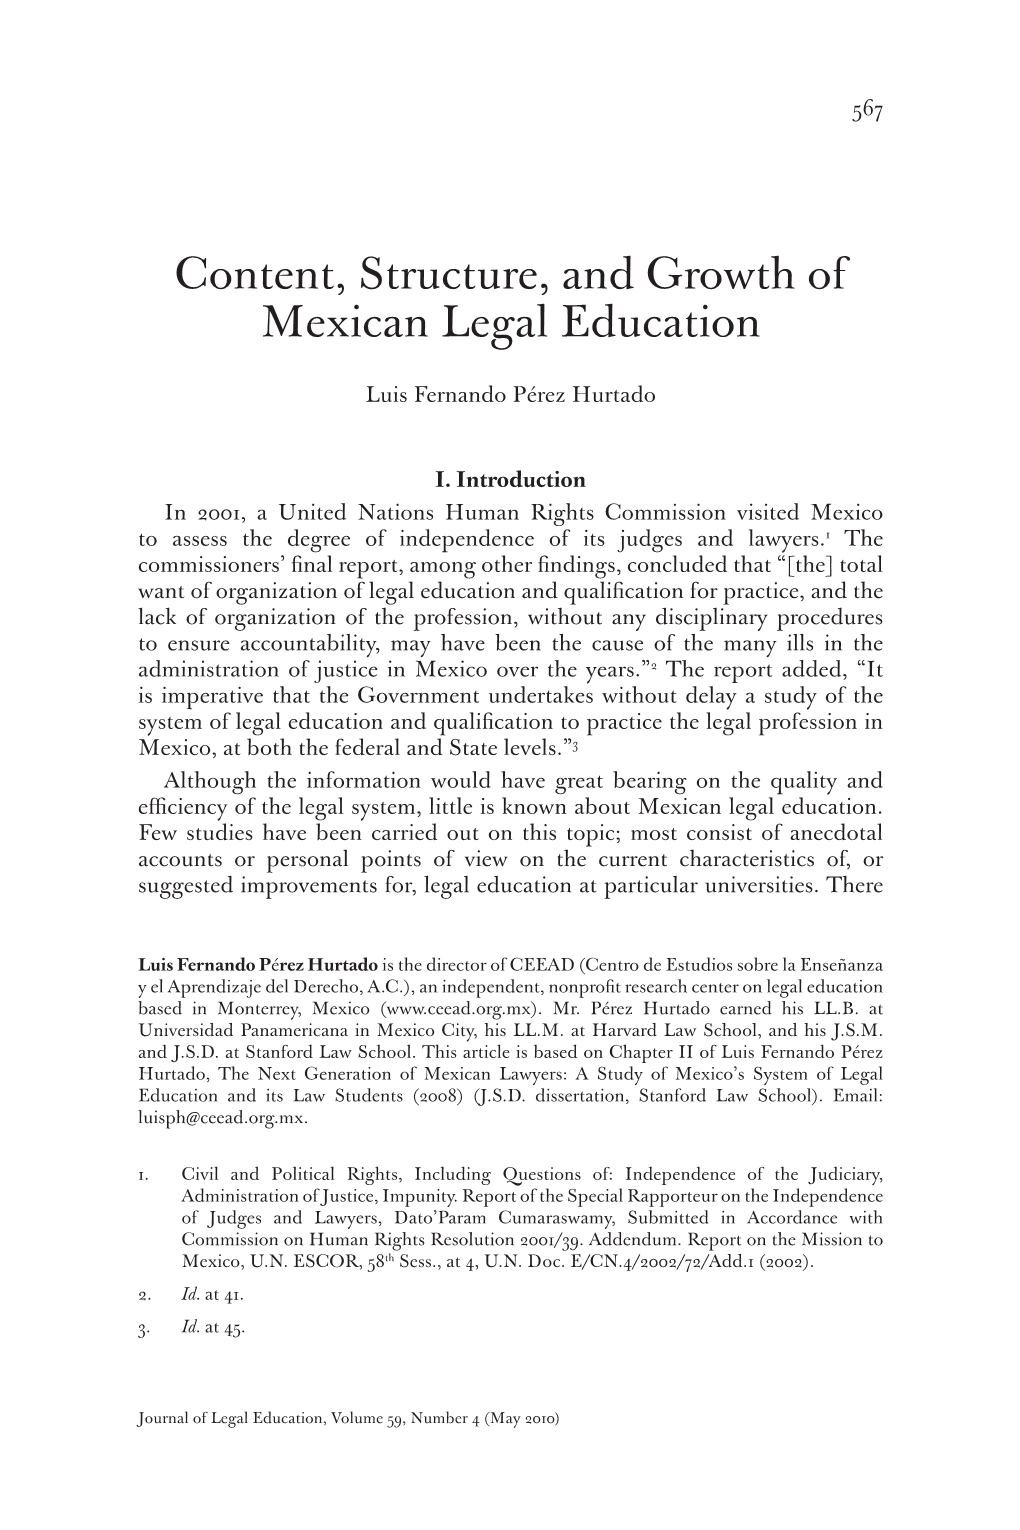 Content, Structure, and Growth of Mexican Legal Education